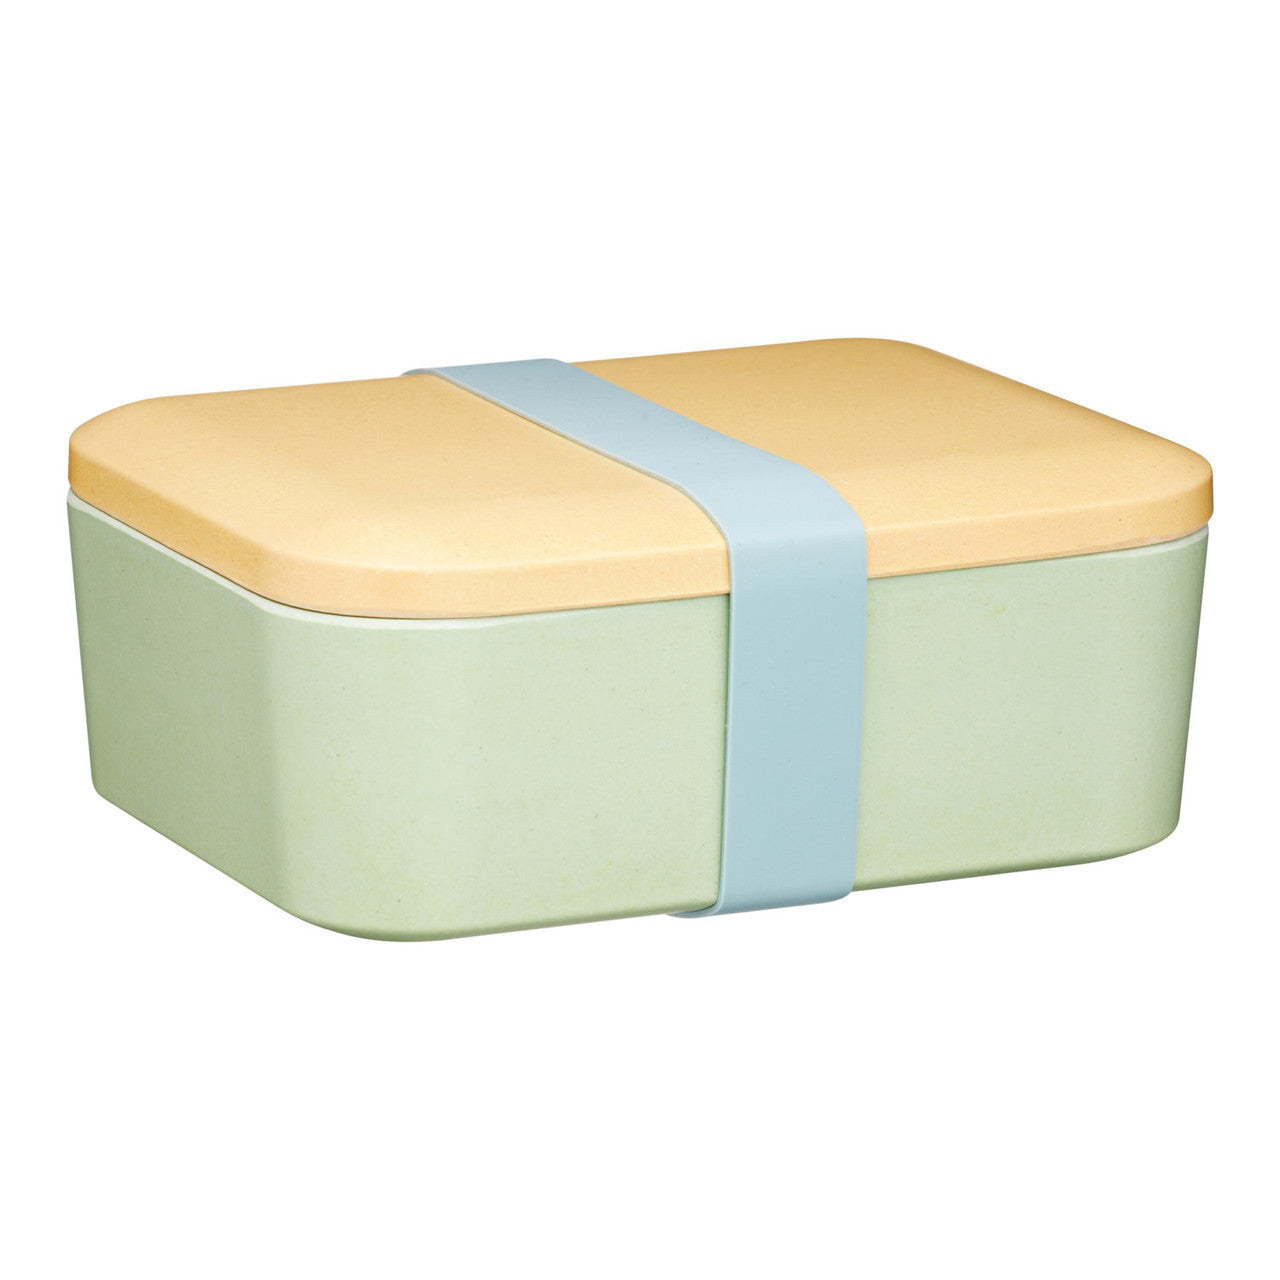 Natural Elements Lunch Box, Recycled Plastic Green 19cm x 13cm x 7cm